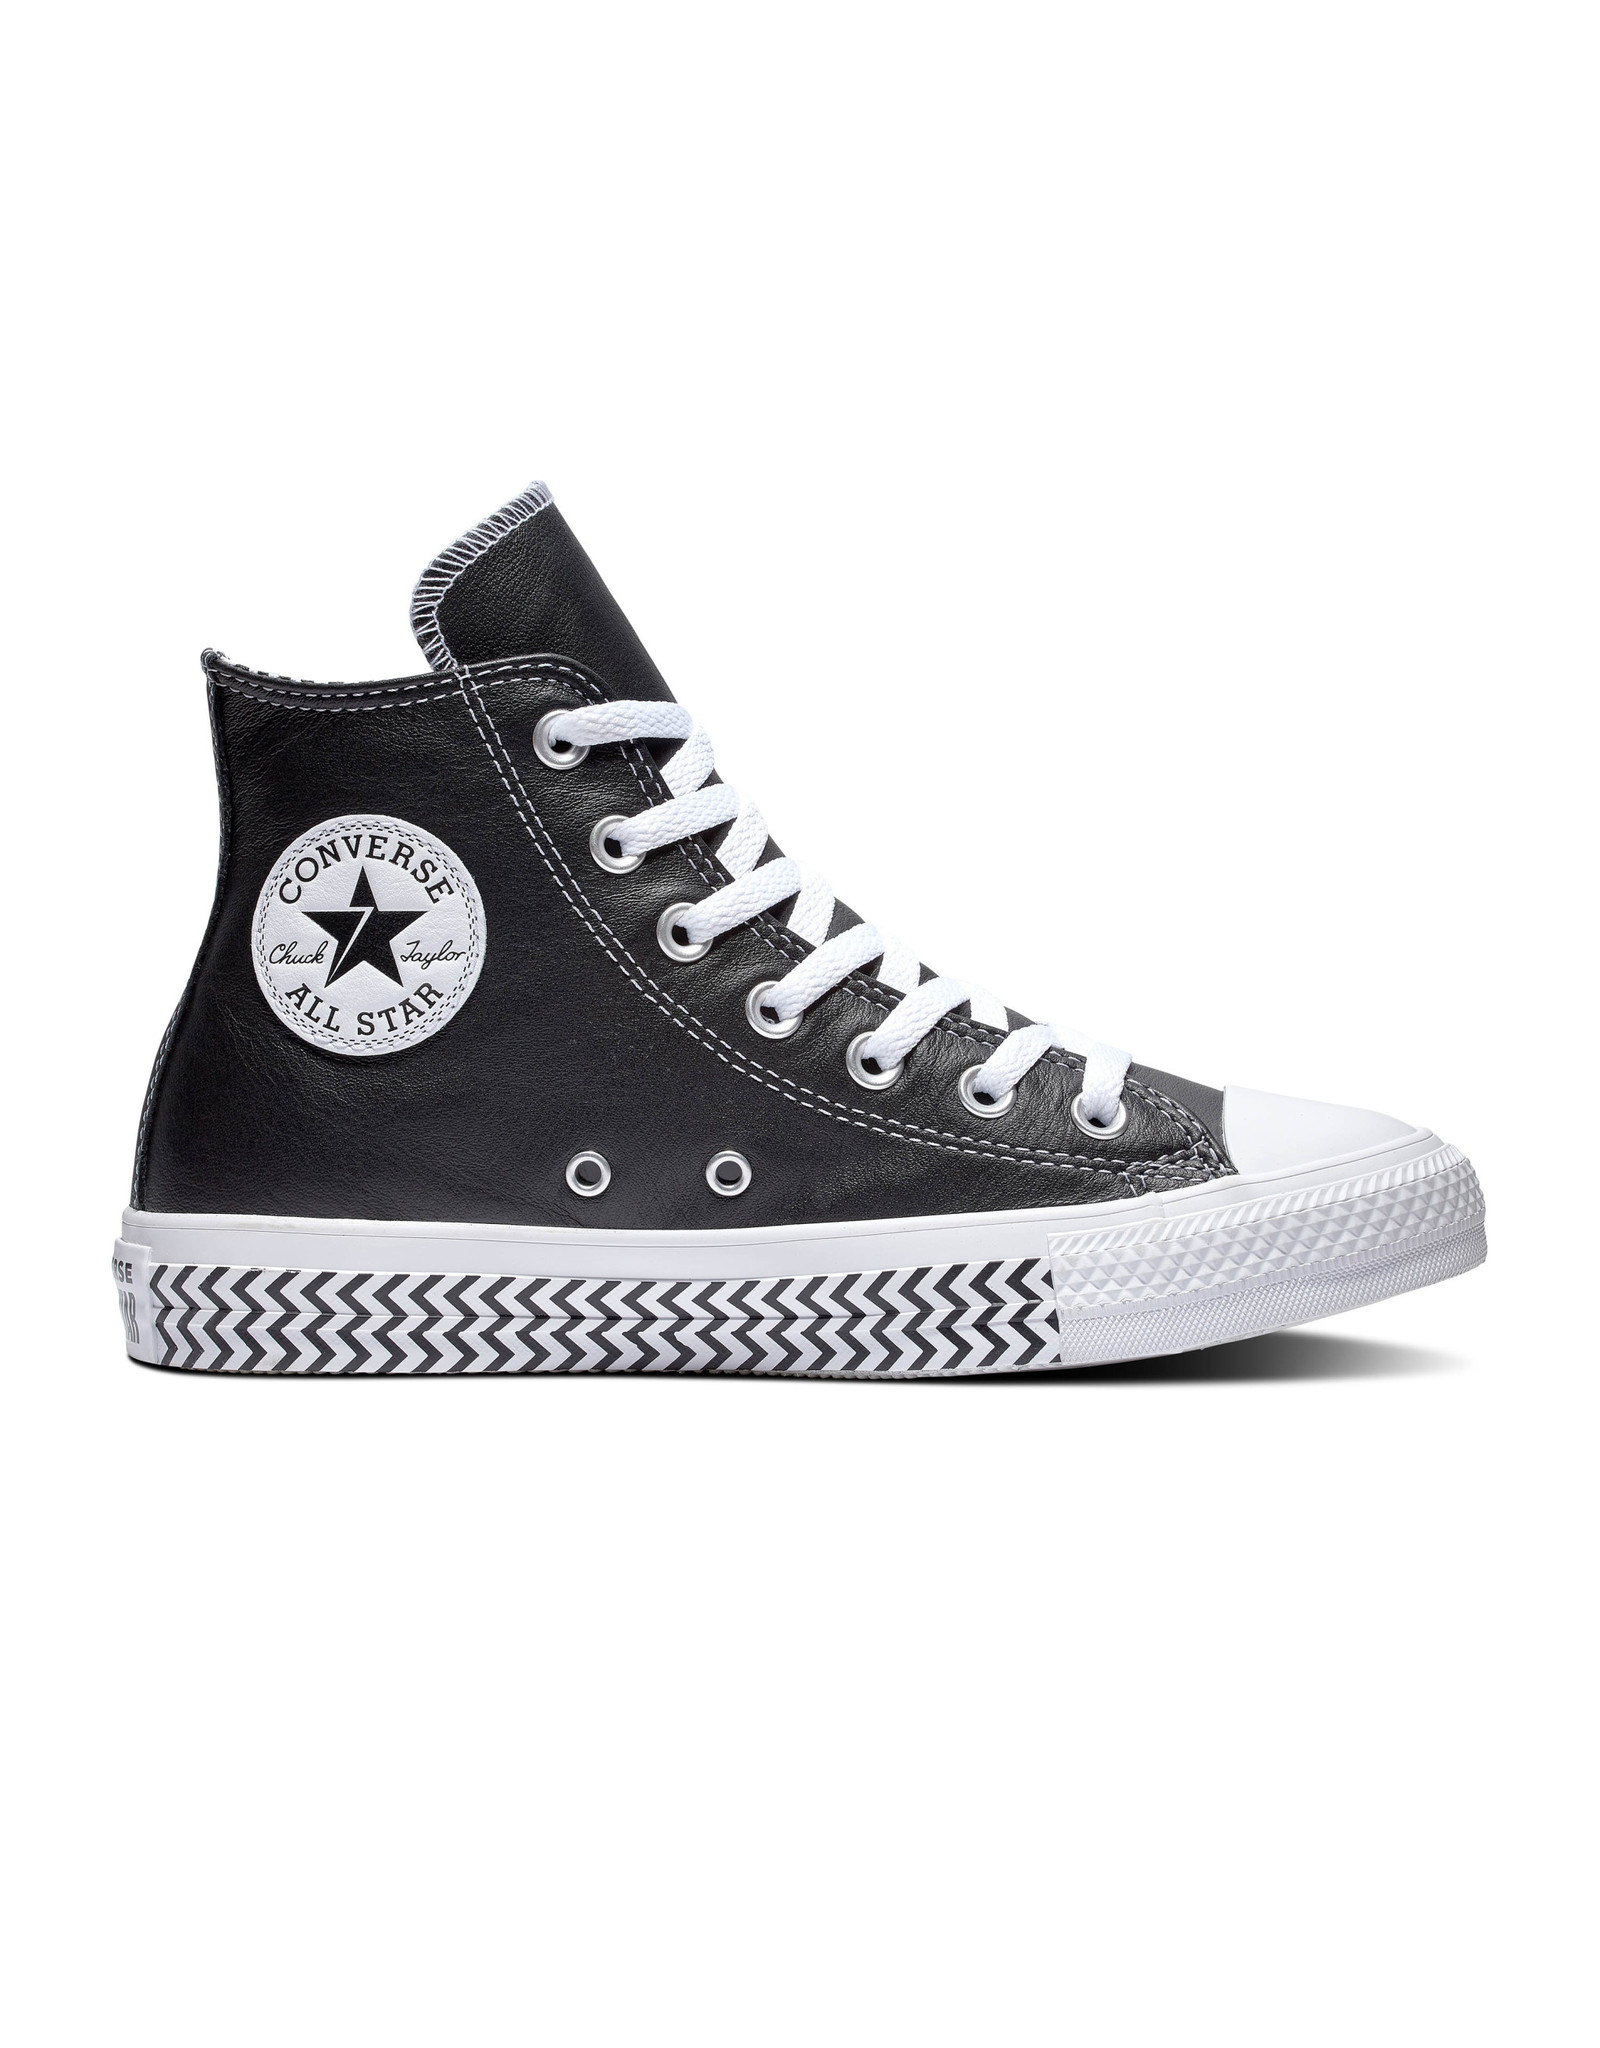 leather black and white converse